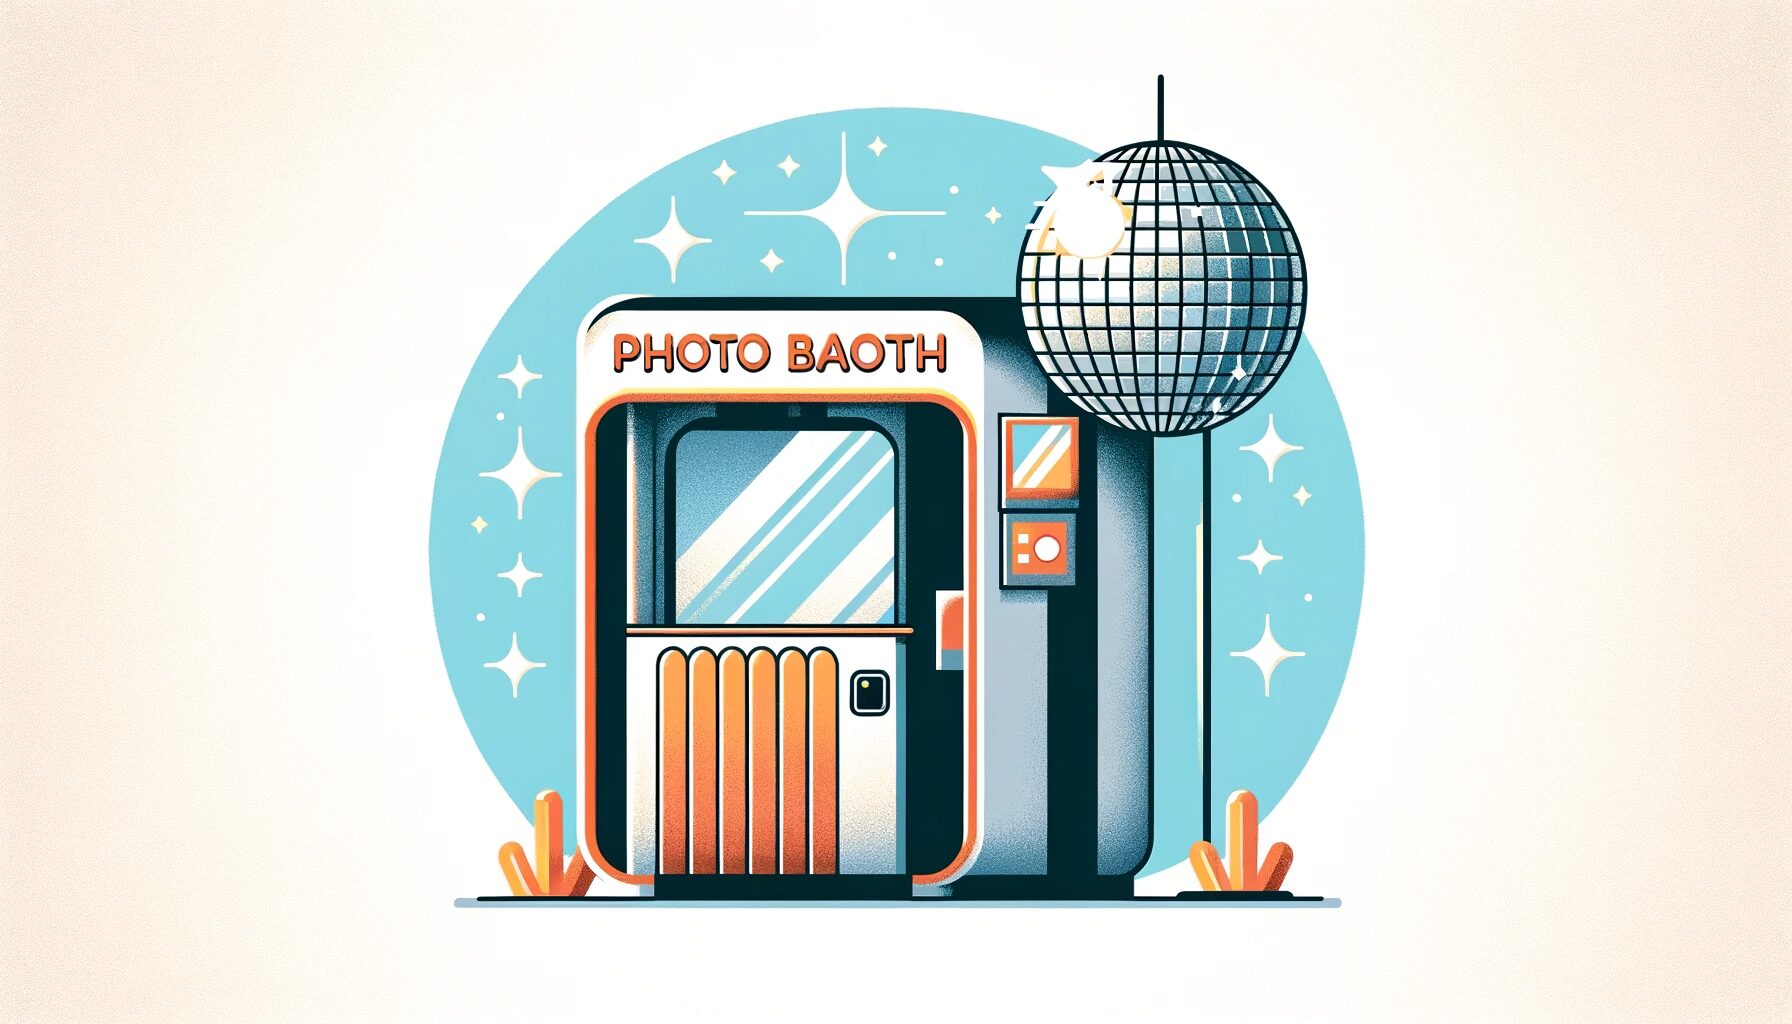 Retro Charm: A Vintage Photo Booth with Disco Flair